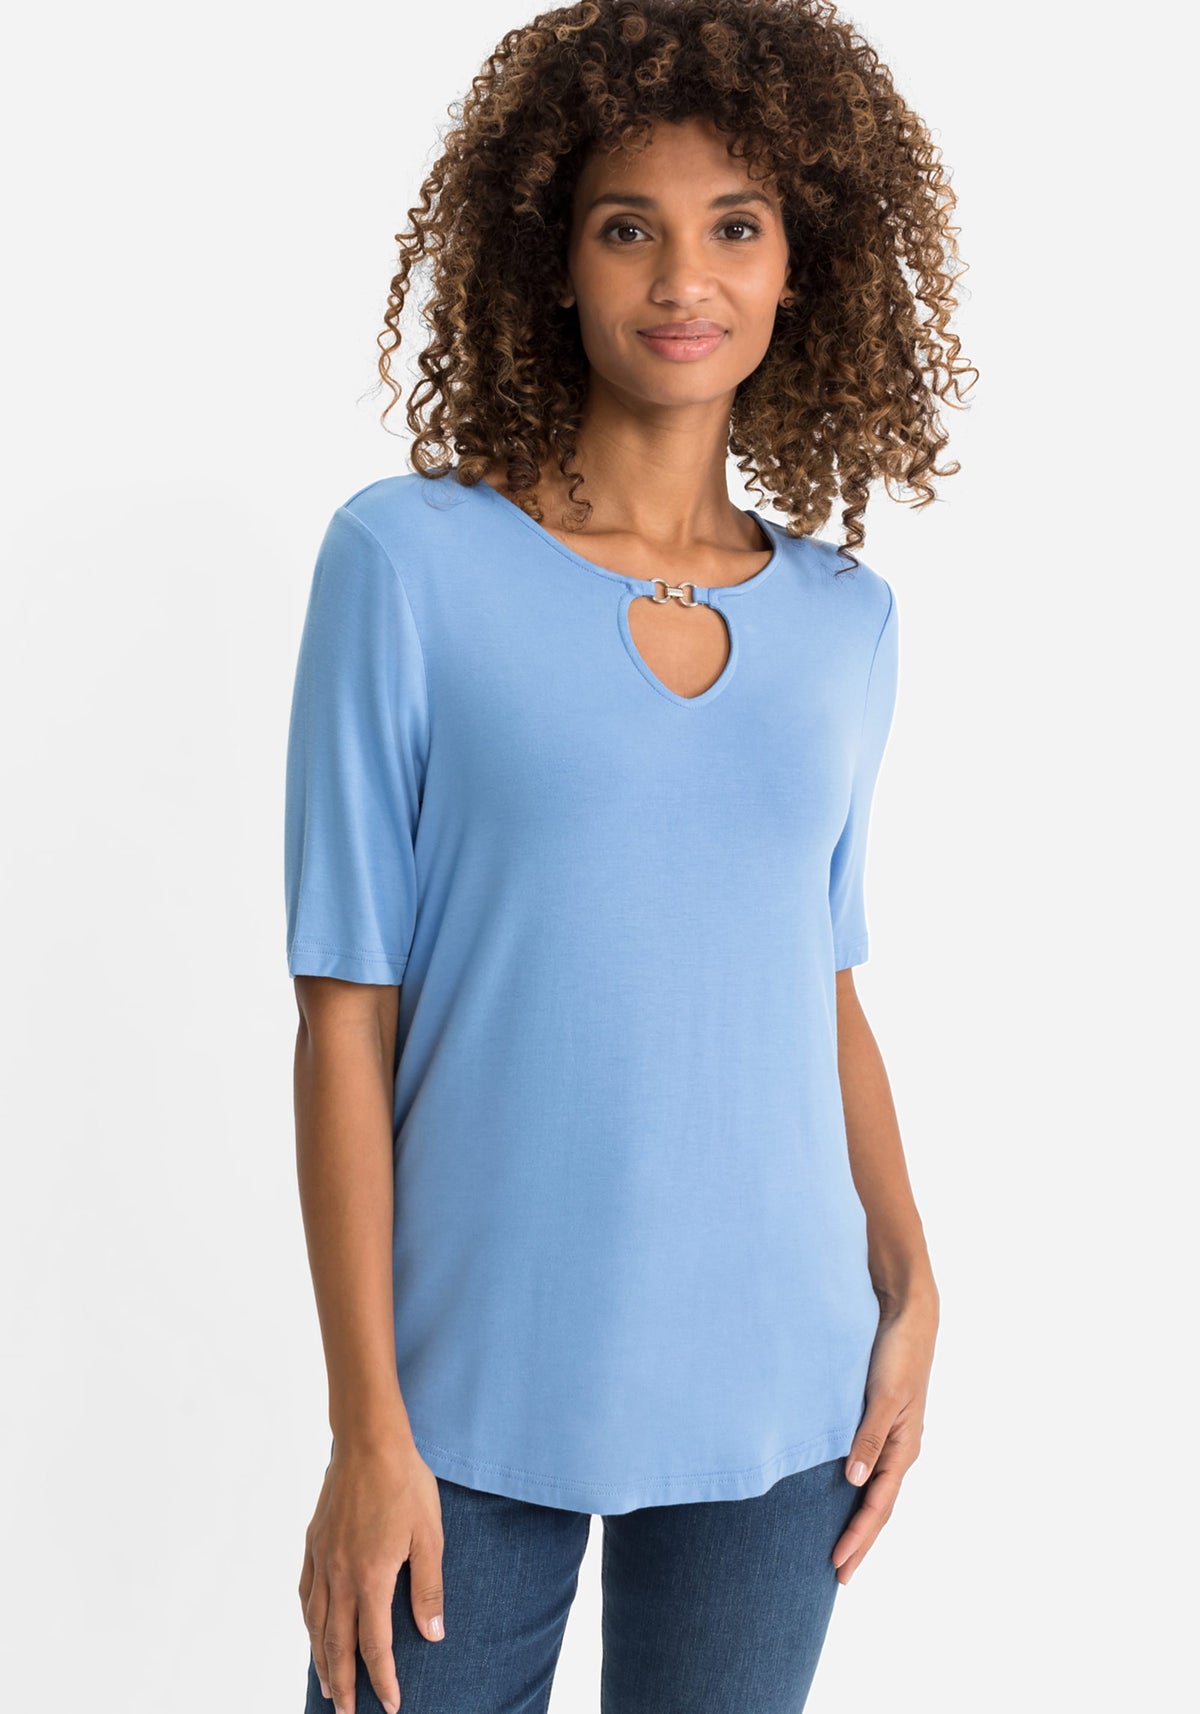 Short Sleeve Solid Tee with Keyhole Neckline